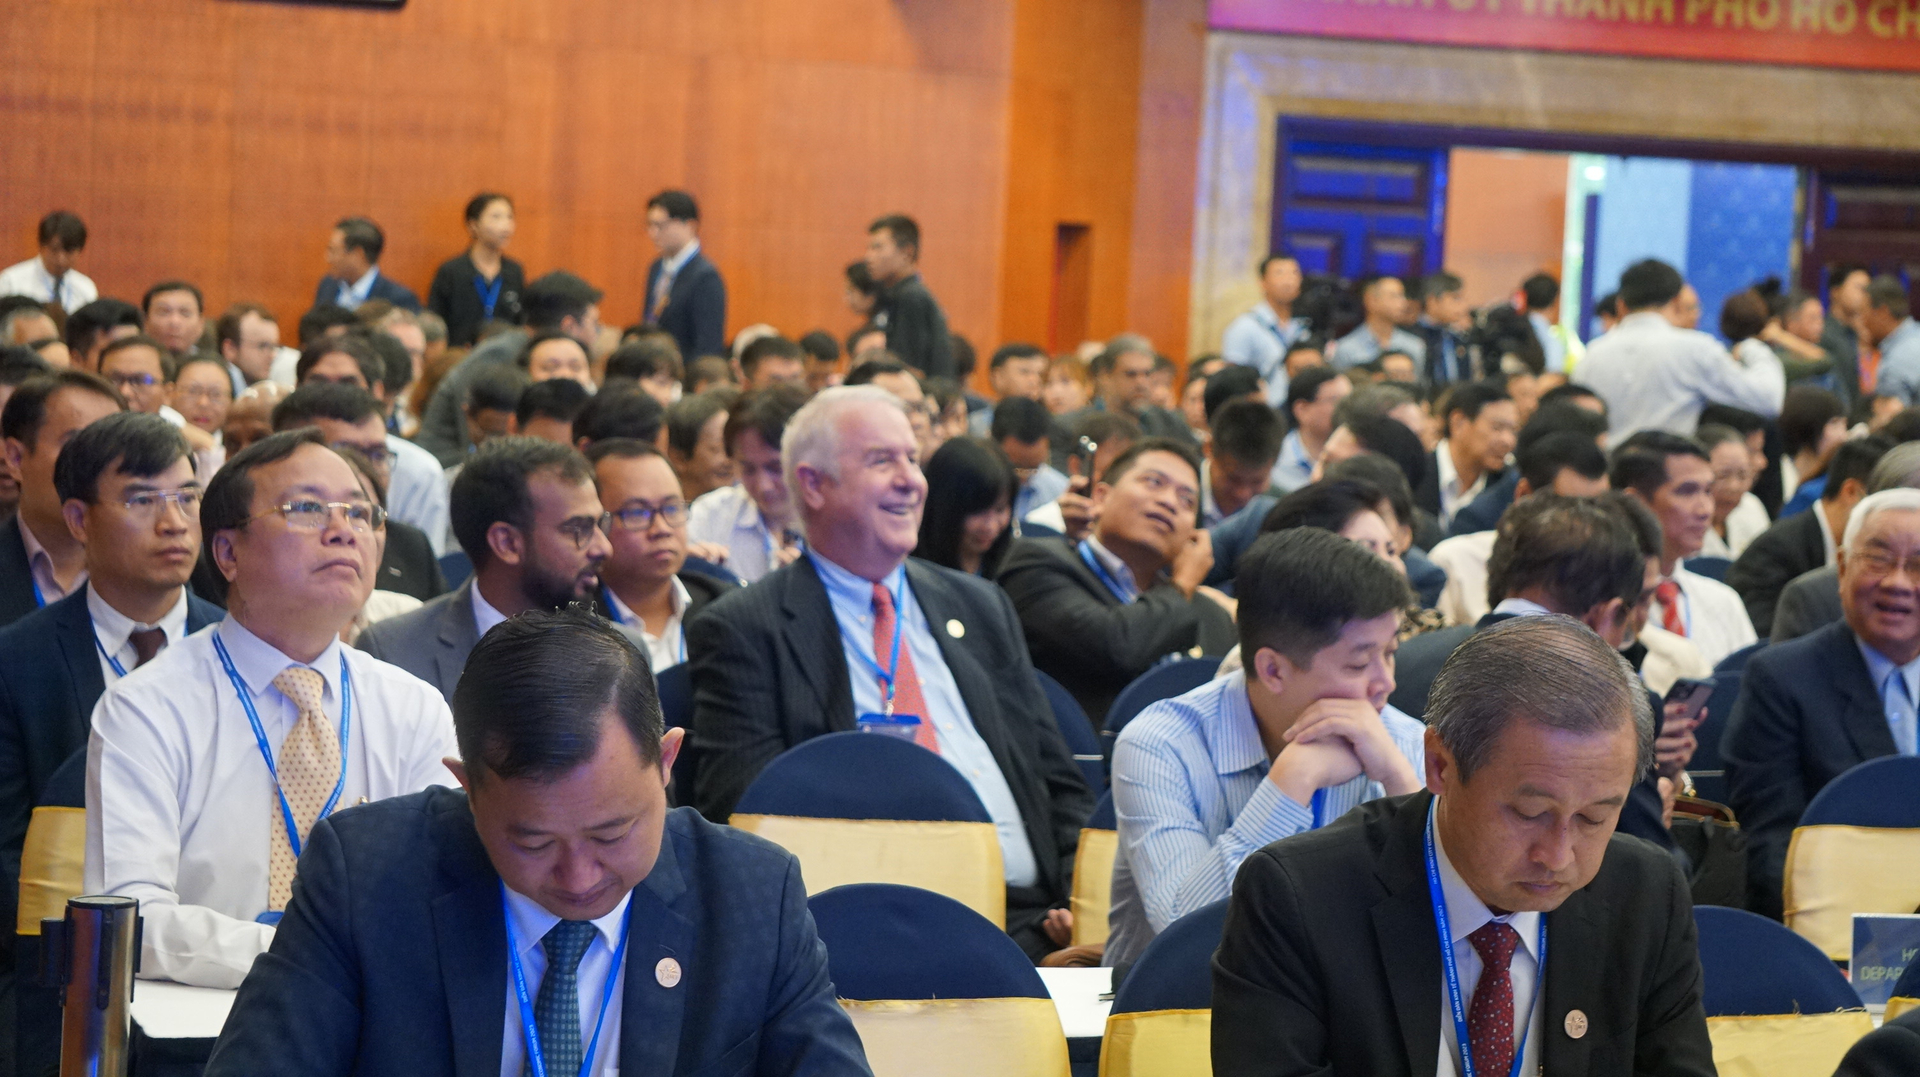 HEF 2023 is attended by more than 1,200 local and international delegates. Photo: Nguyen Thuy.